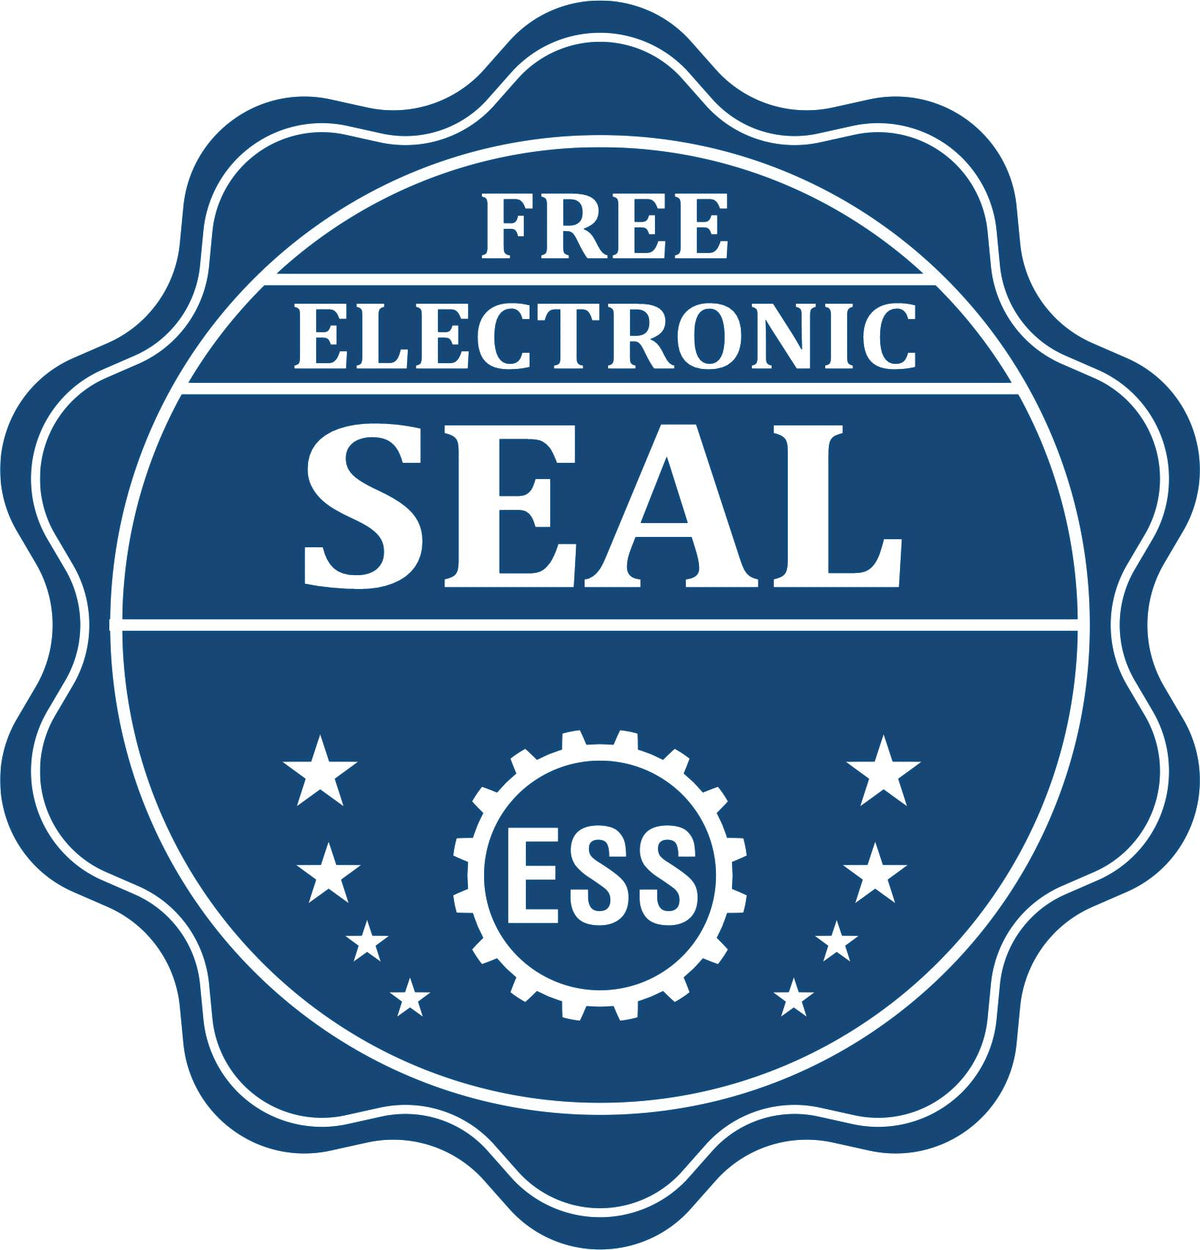 A badge showing a free electronic seal for the Heavy Duty Cast Iron Florida Land Surveyor Seal Embosser with stars and the ESS gear on the emblem.